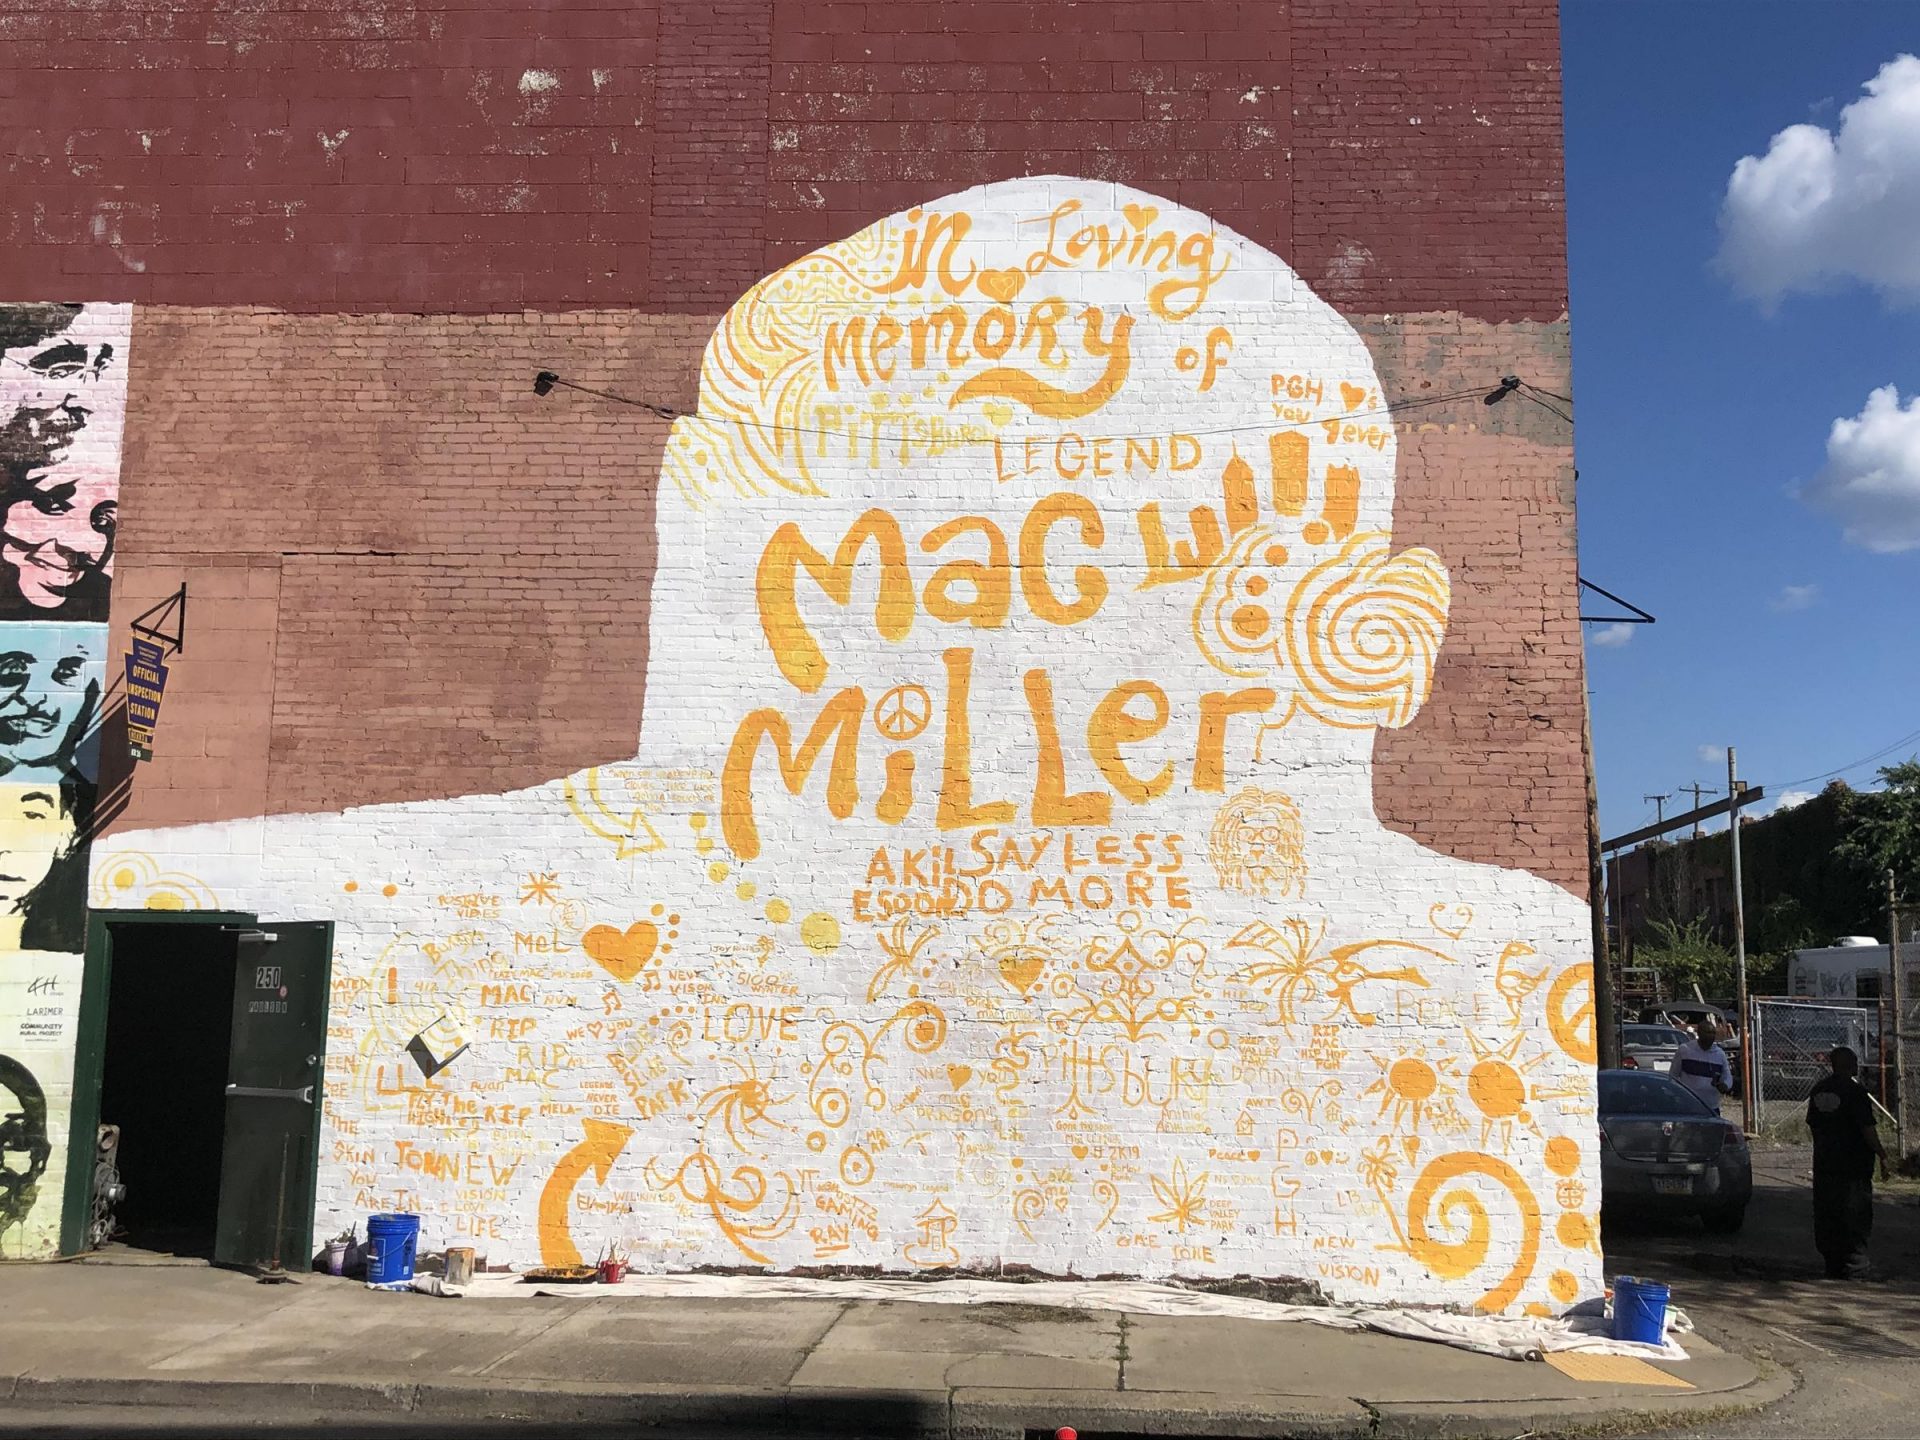 A mural in memory of Mac Miller was painted by students and local artists in Pittsburgh's Larimer neighborhood on Wednesday, August 28, 2019. The mural is part of the MLK Mural Project, which includes more than 350 pieces in Allegheny County.